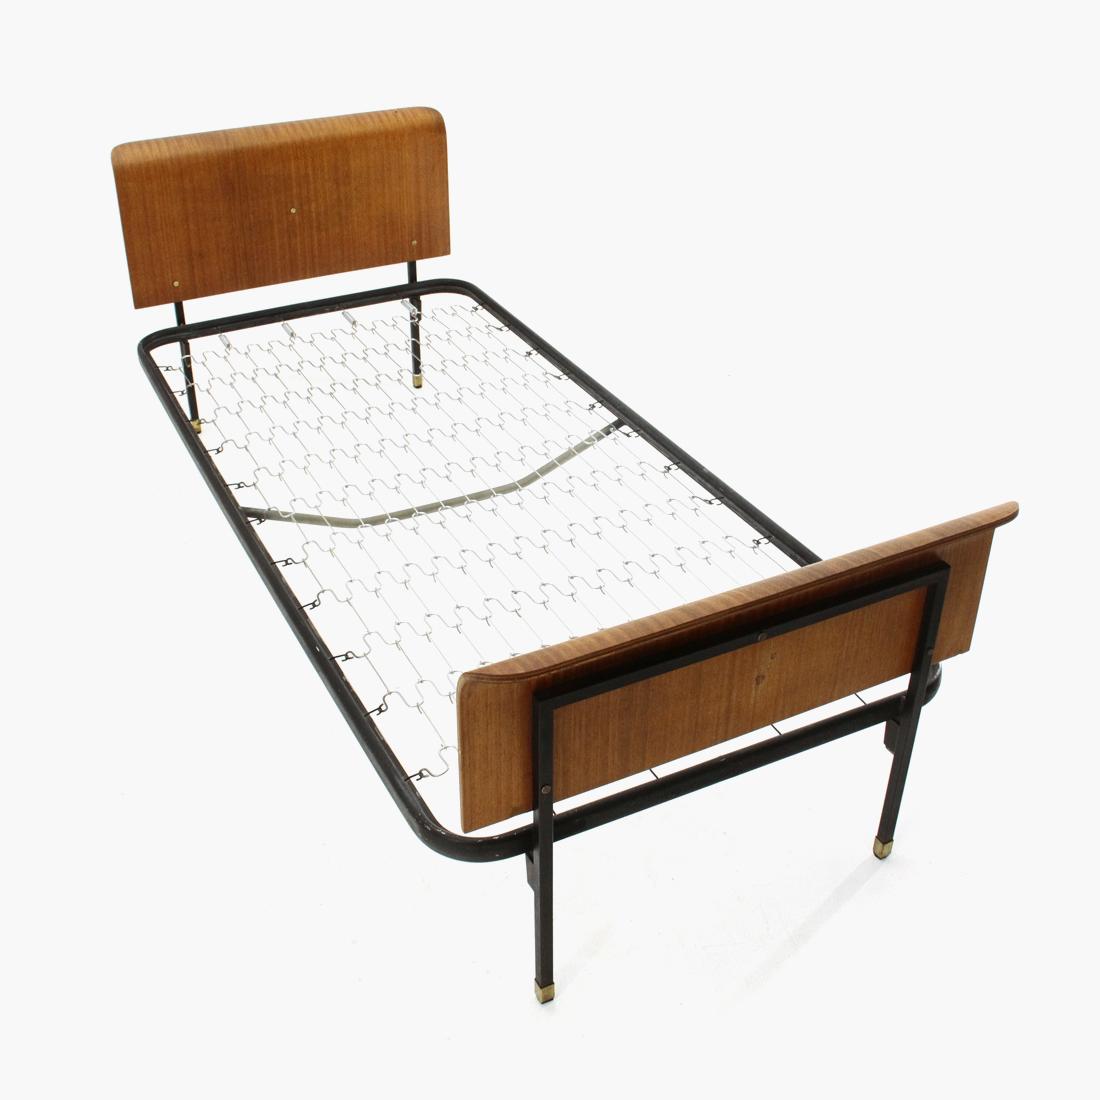 Italian Single Bed with Headboard and Footboard in Curved Plywood, 1950s